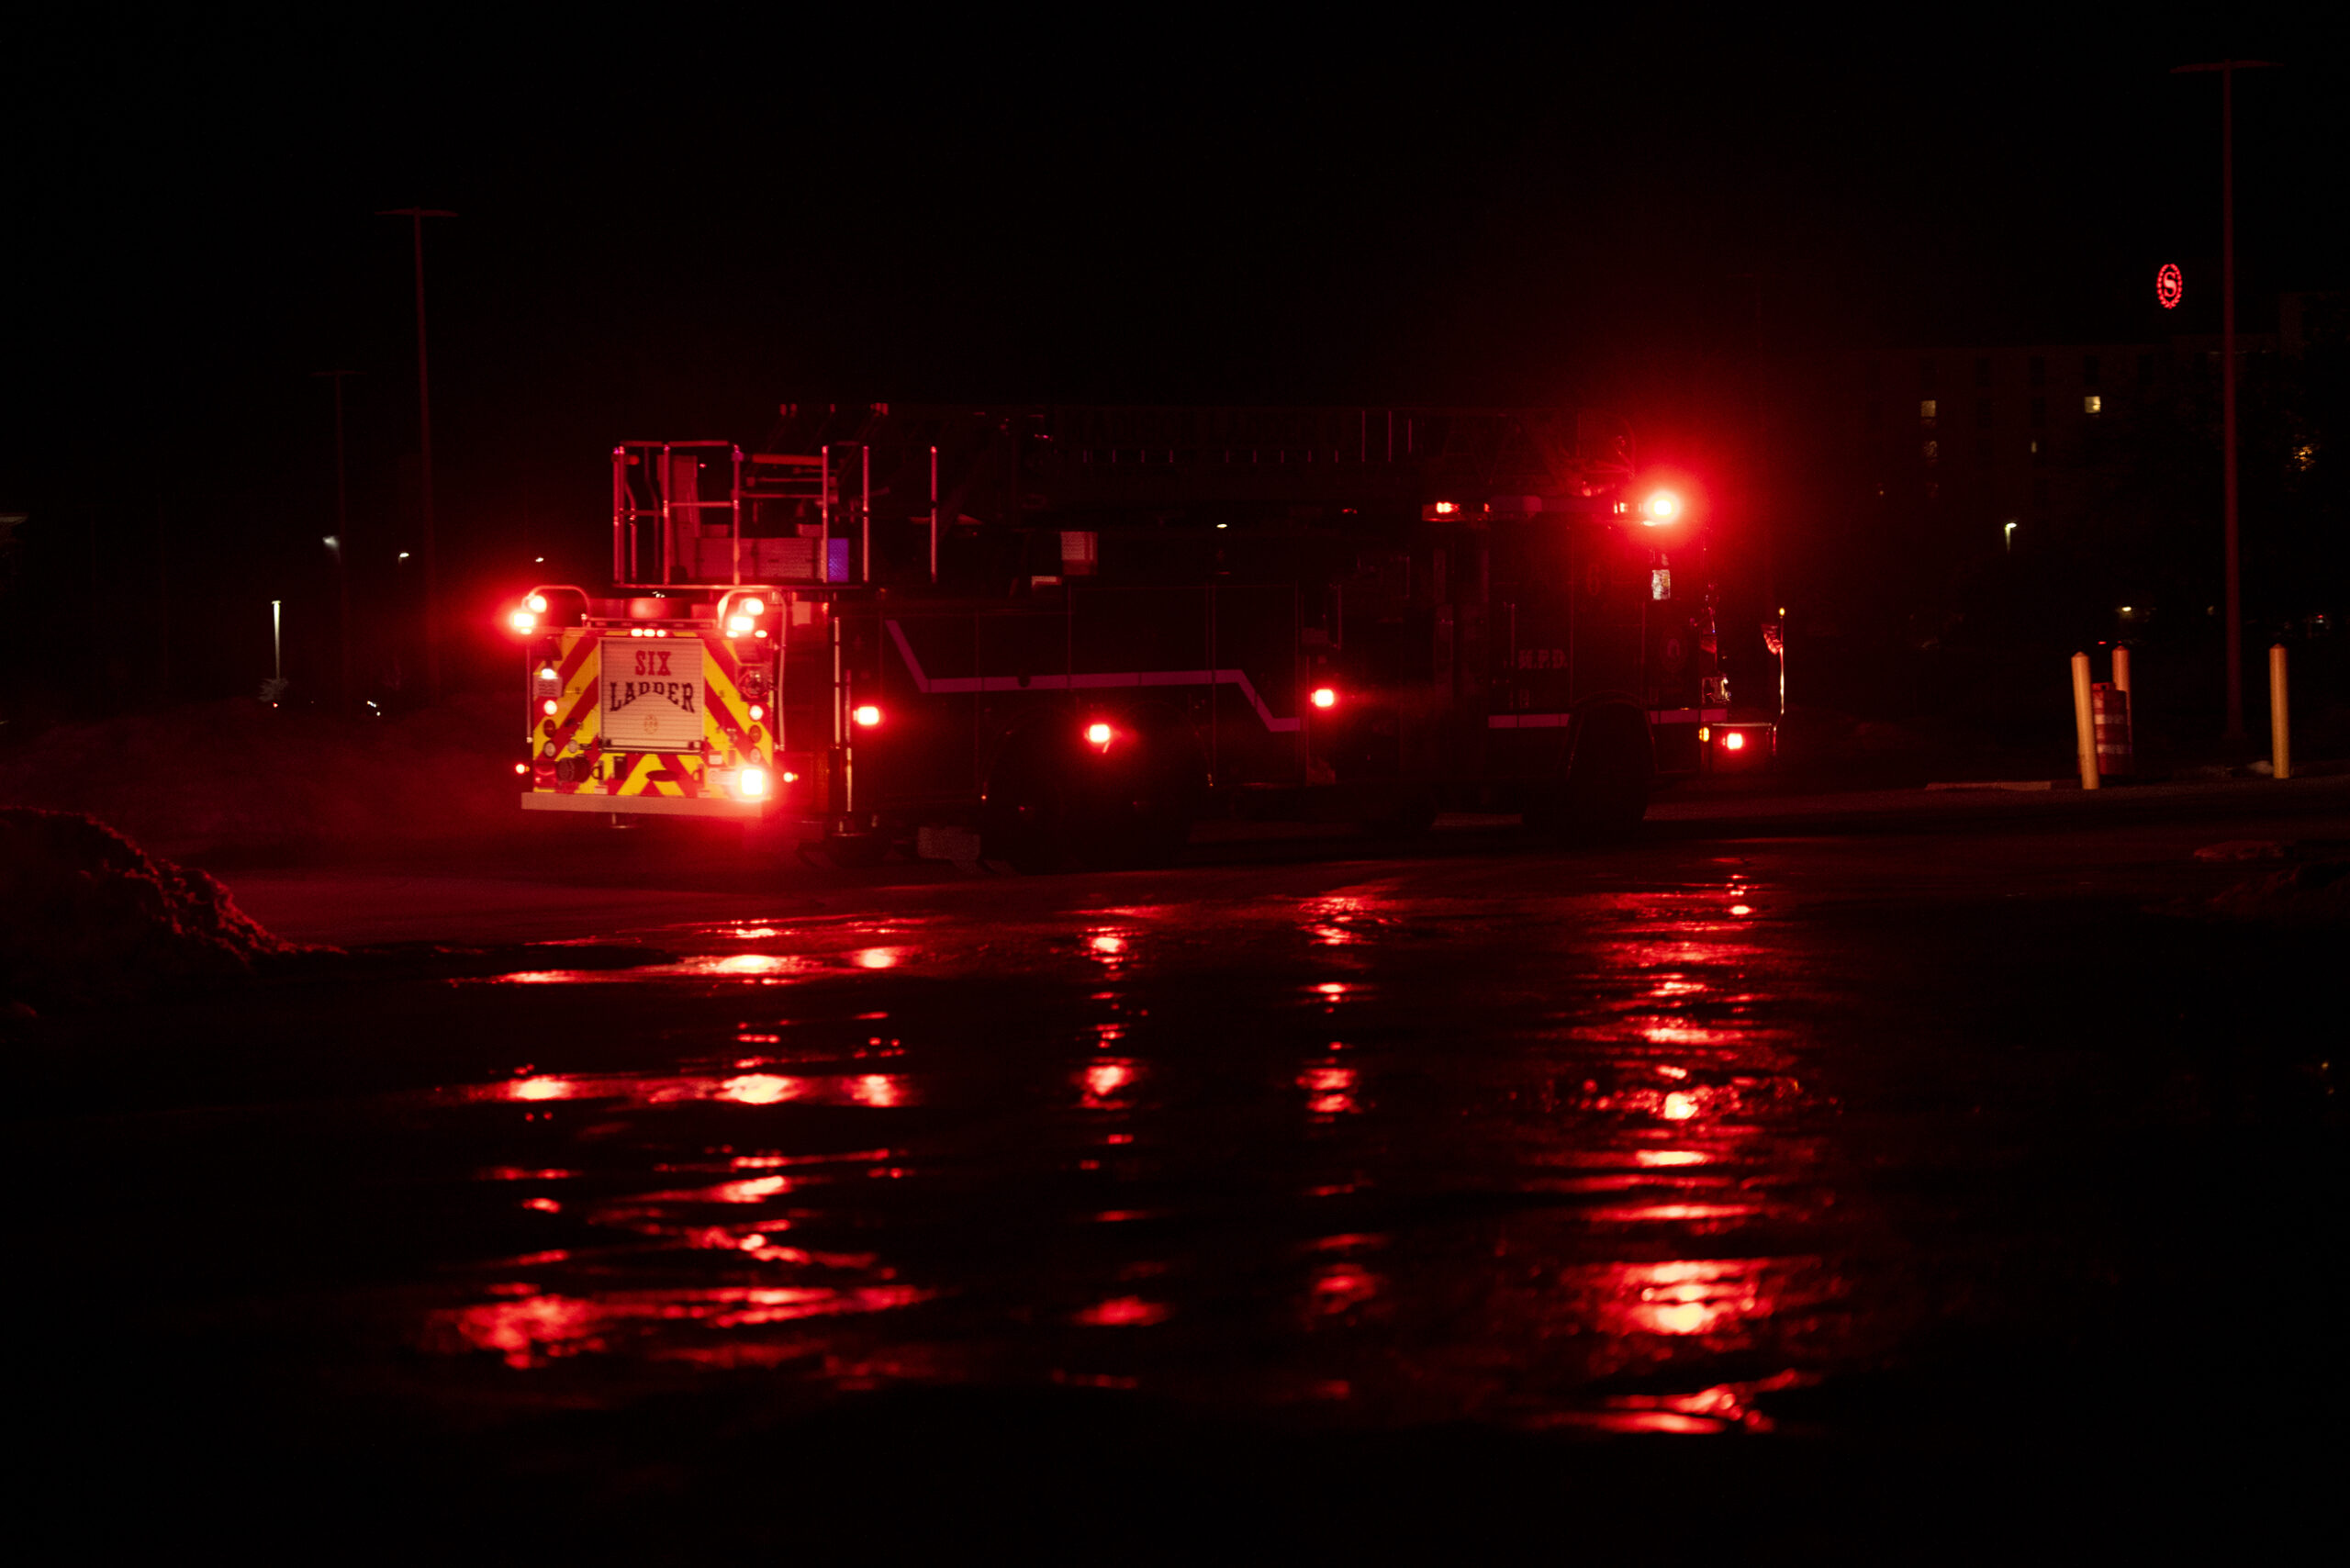 A dark night sky surrounds a firetruck with red lights on. Ice and water on the pavement glow with a reflection.